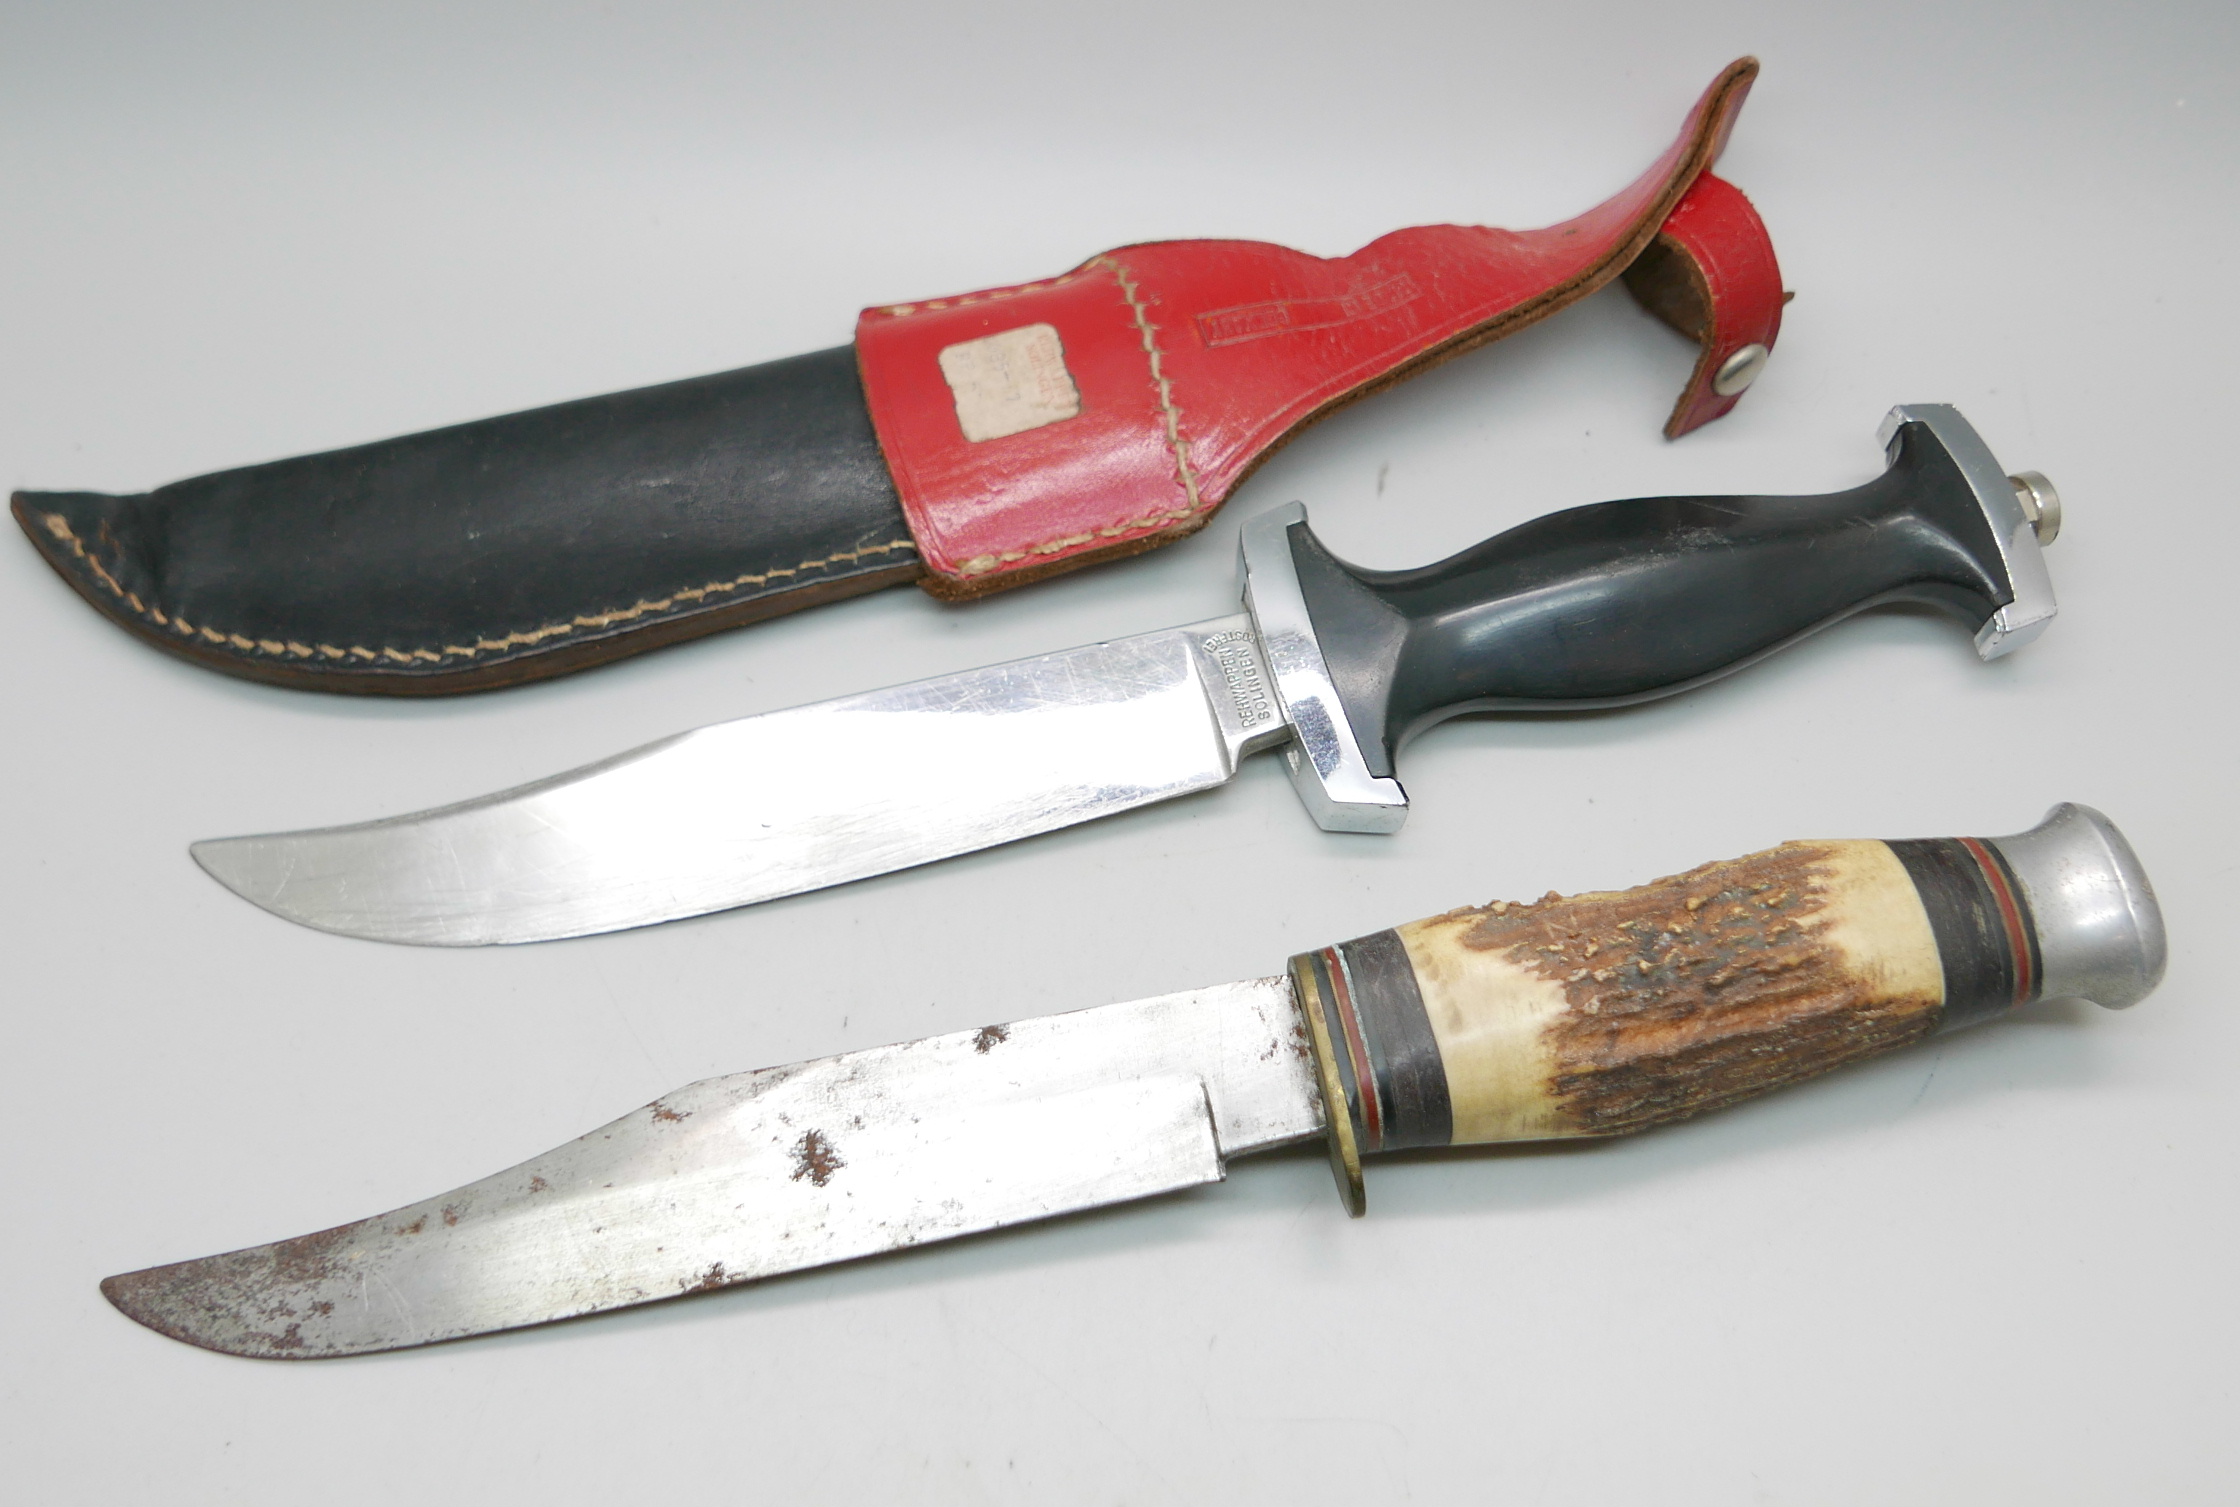 A dagger with scabbard, the blade marked Rehwappen Solingen, and one other dagger wtih antler